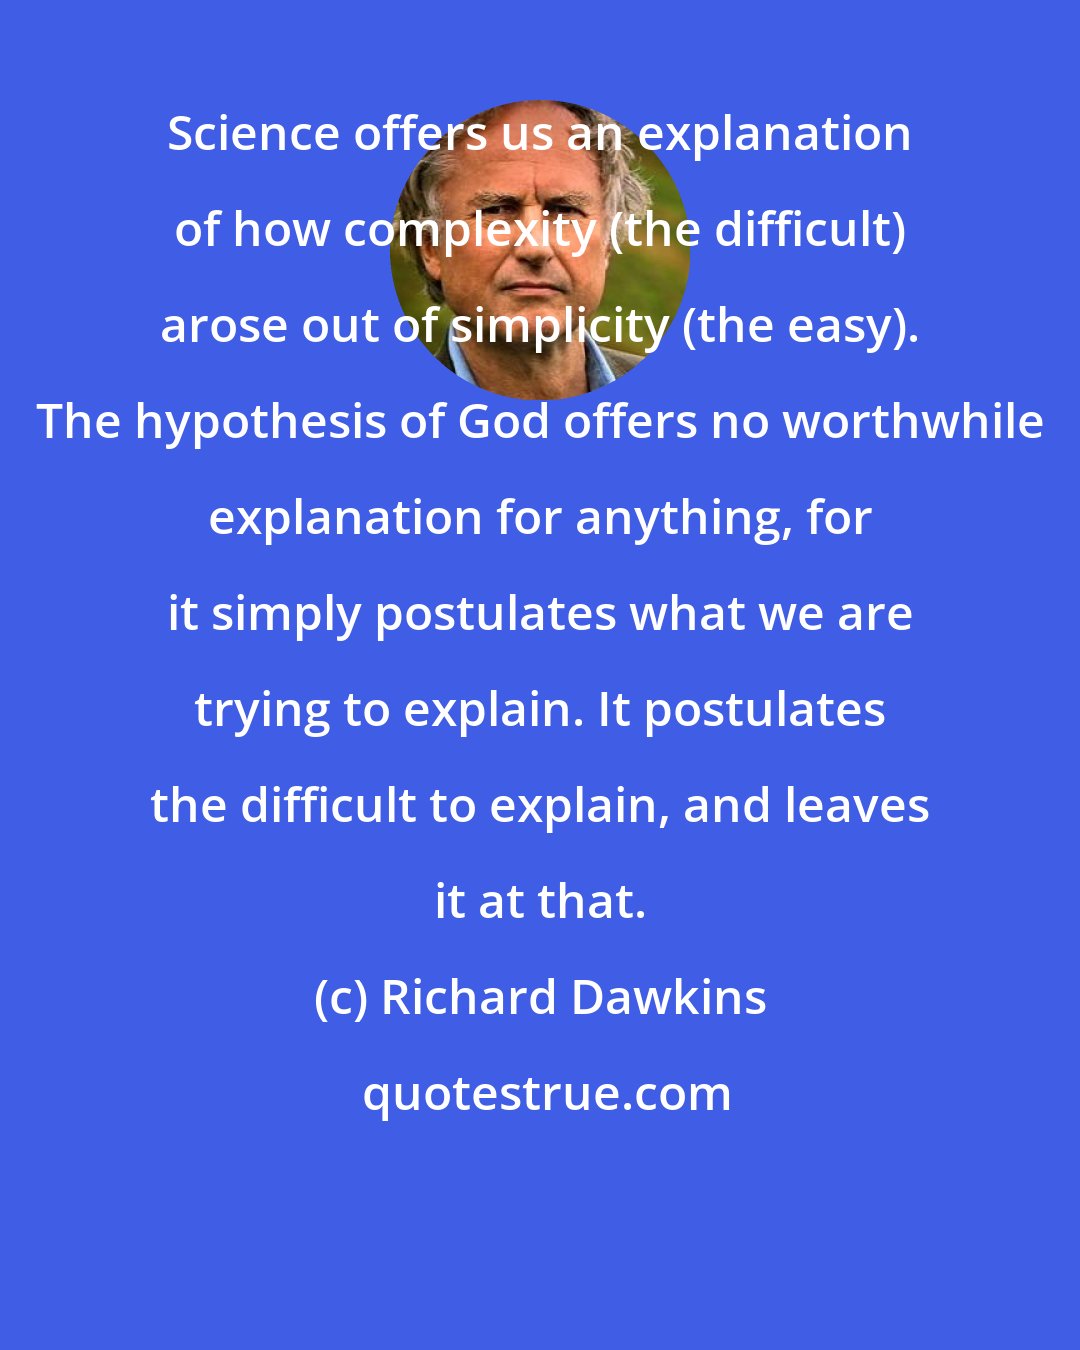 Richard Dawkins: Science offers us an explanation of how complexity (the difficult) arose out of simplicity (the easy). The hypothesis of God offers no worthwhile explanation for anything, for it simply postulates what we are trying to explain. It postulates the difficult to explain, and leaves it at that.